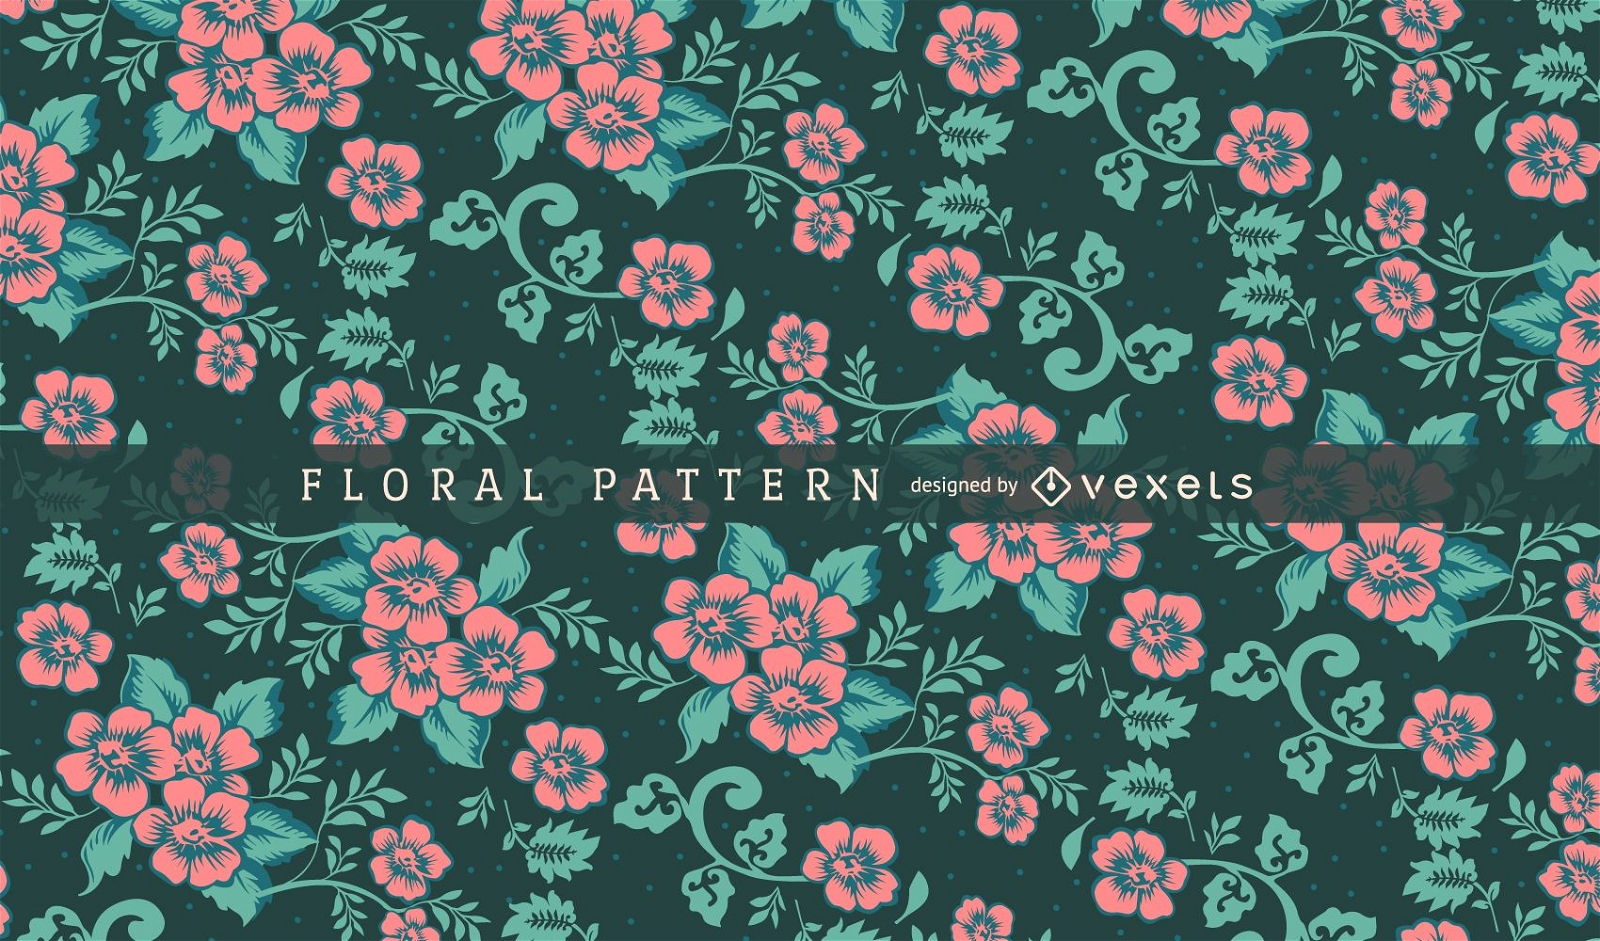 Green and pink floral pattern